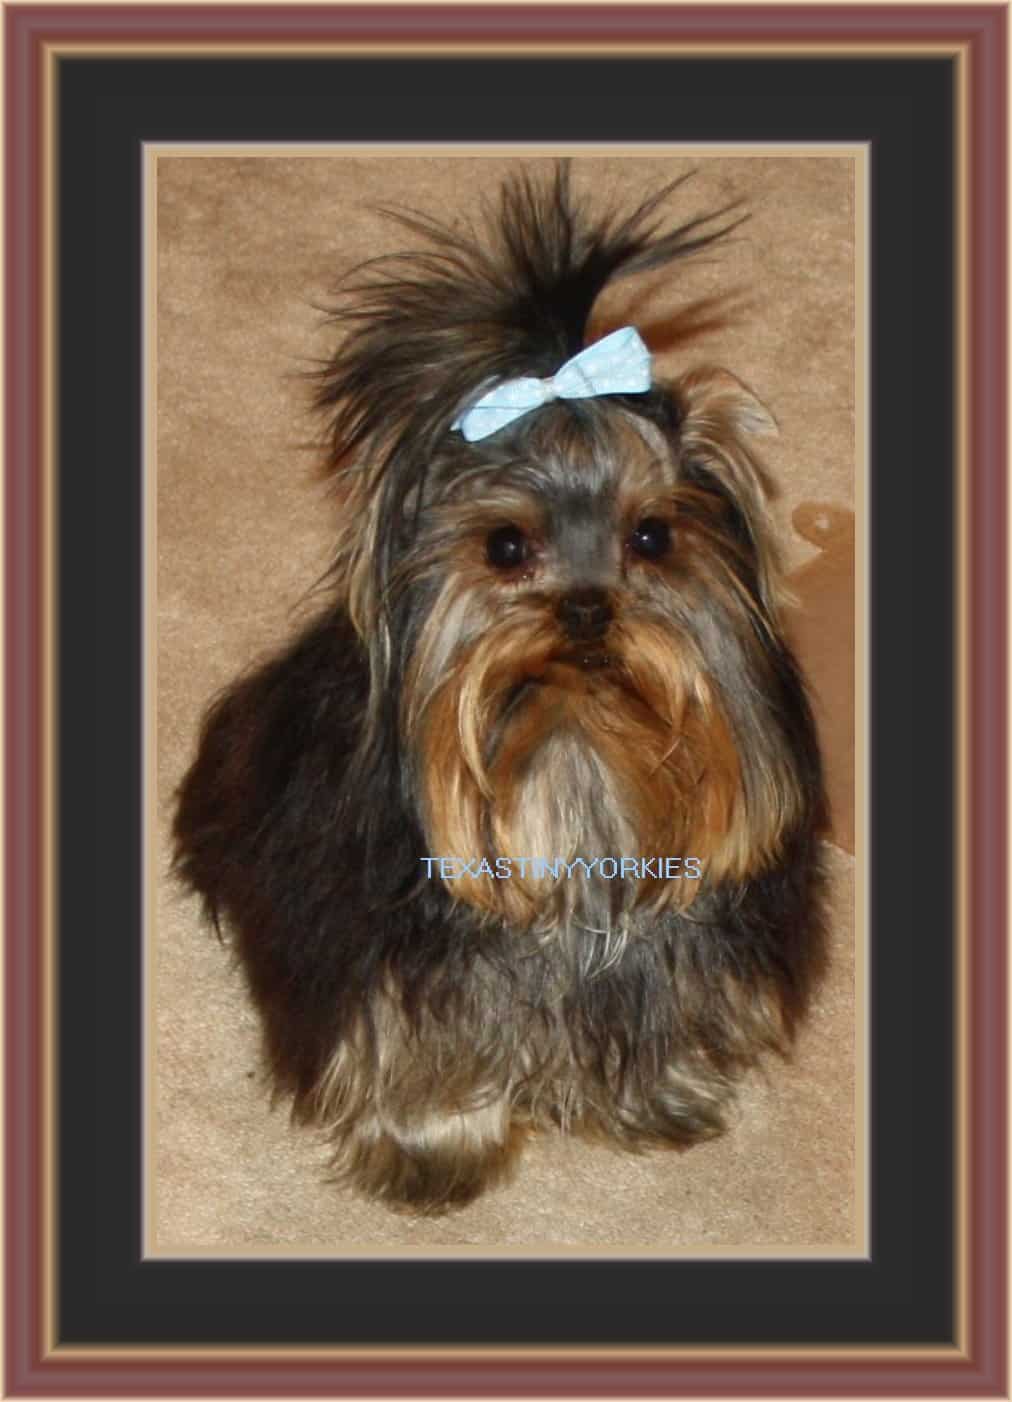 A yorkshire terrier with a bow on its head, bred by professional breeders.